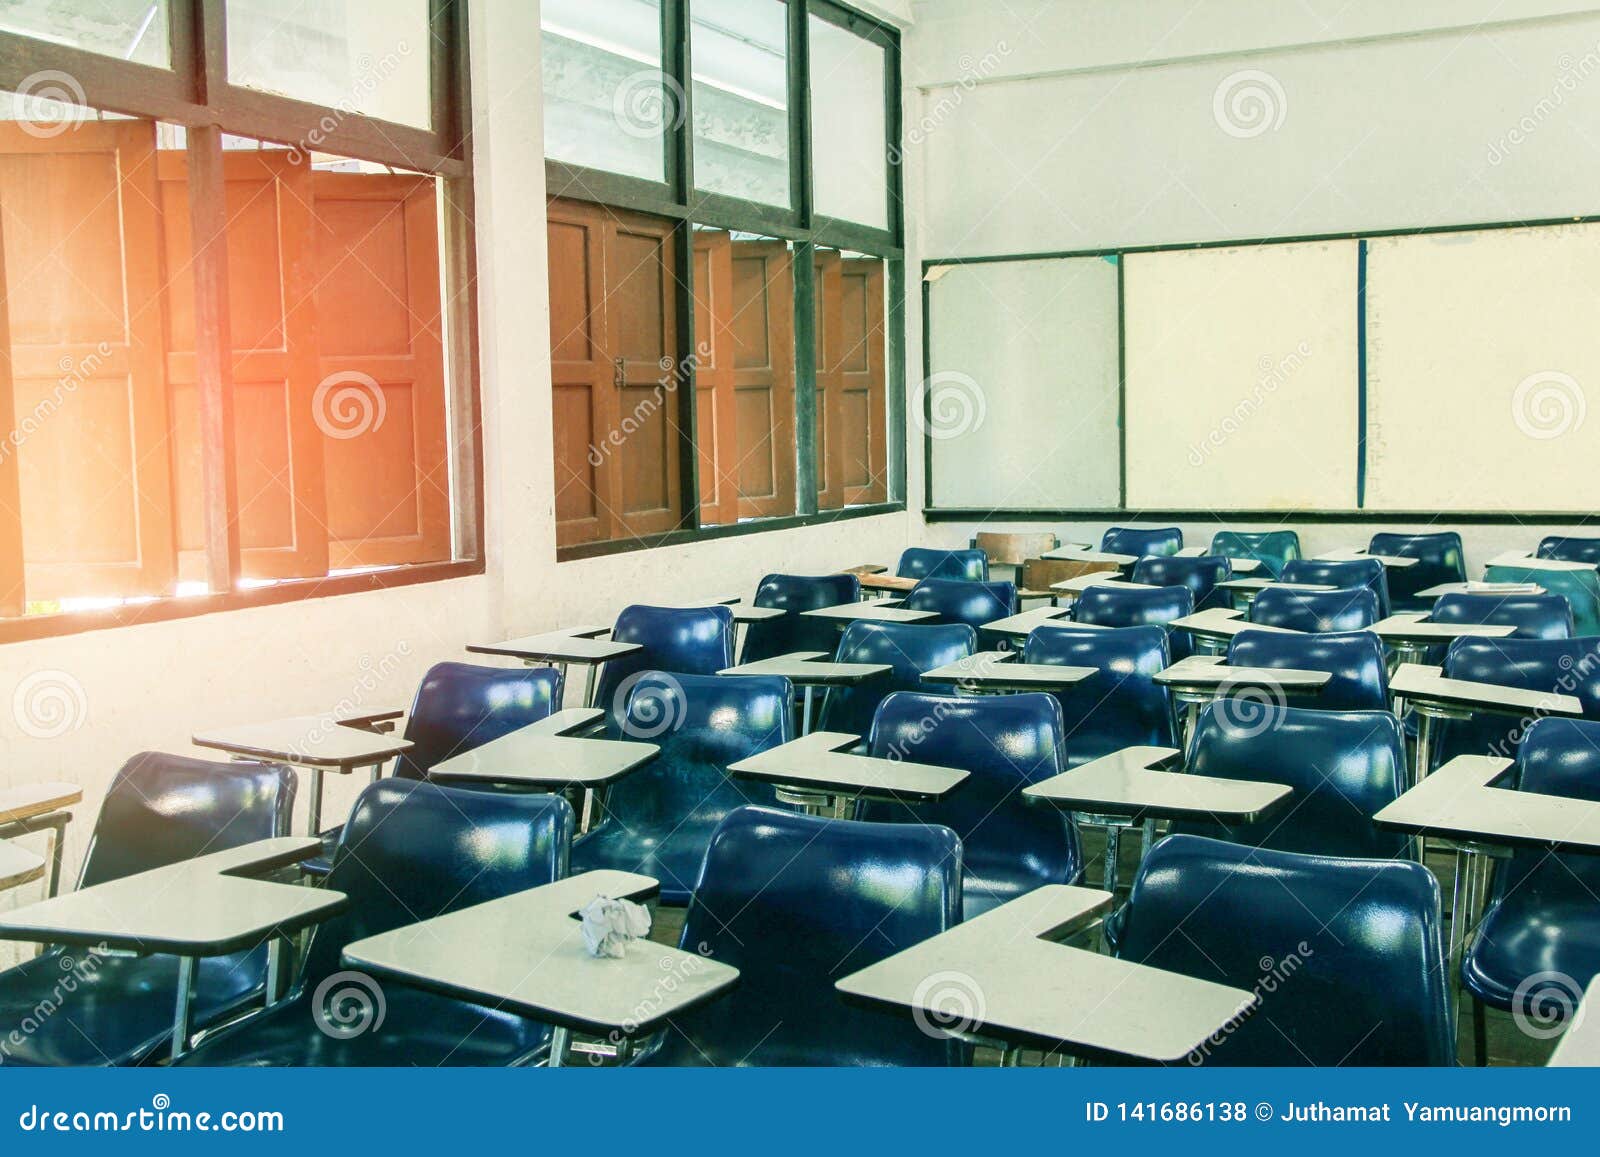 Classroom in Background with Out ,No Student or Teacher . Stock Photo -  Image of furniture, elementary: 141686138